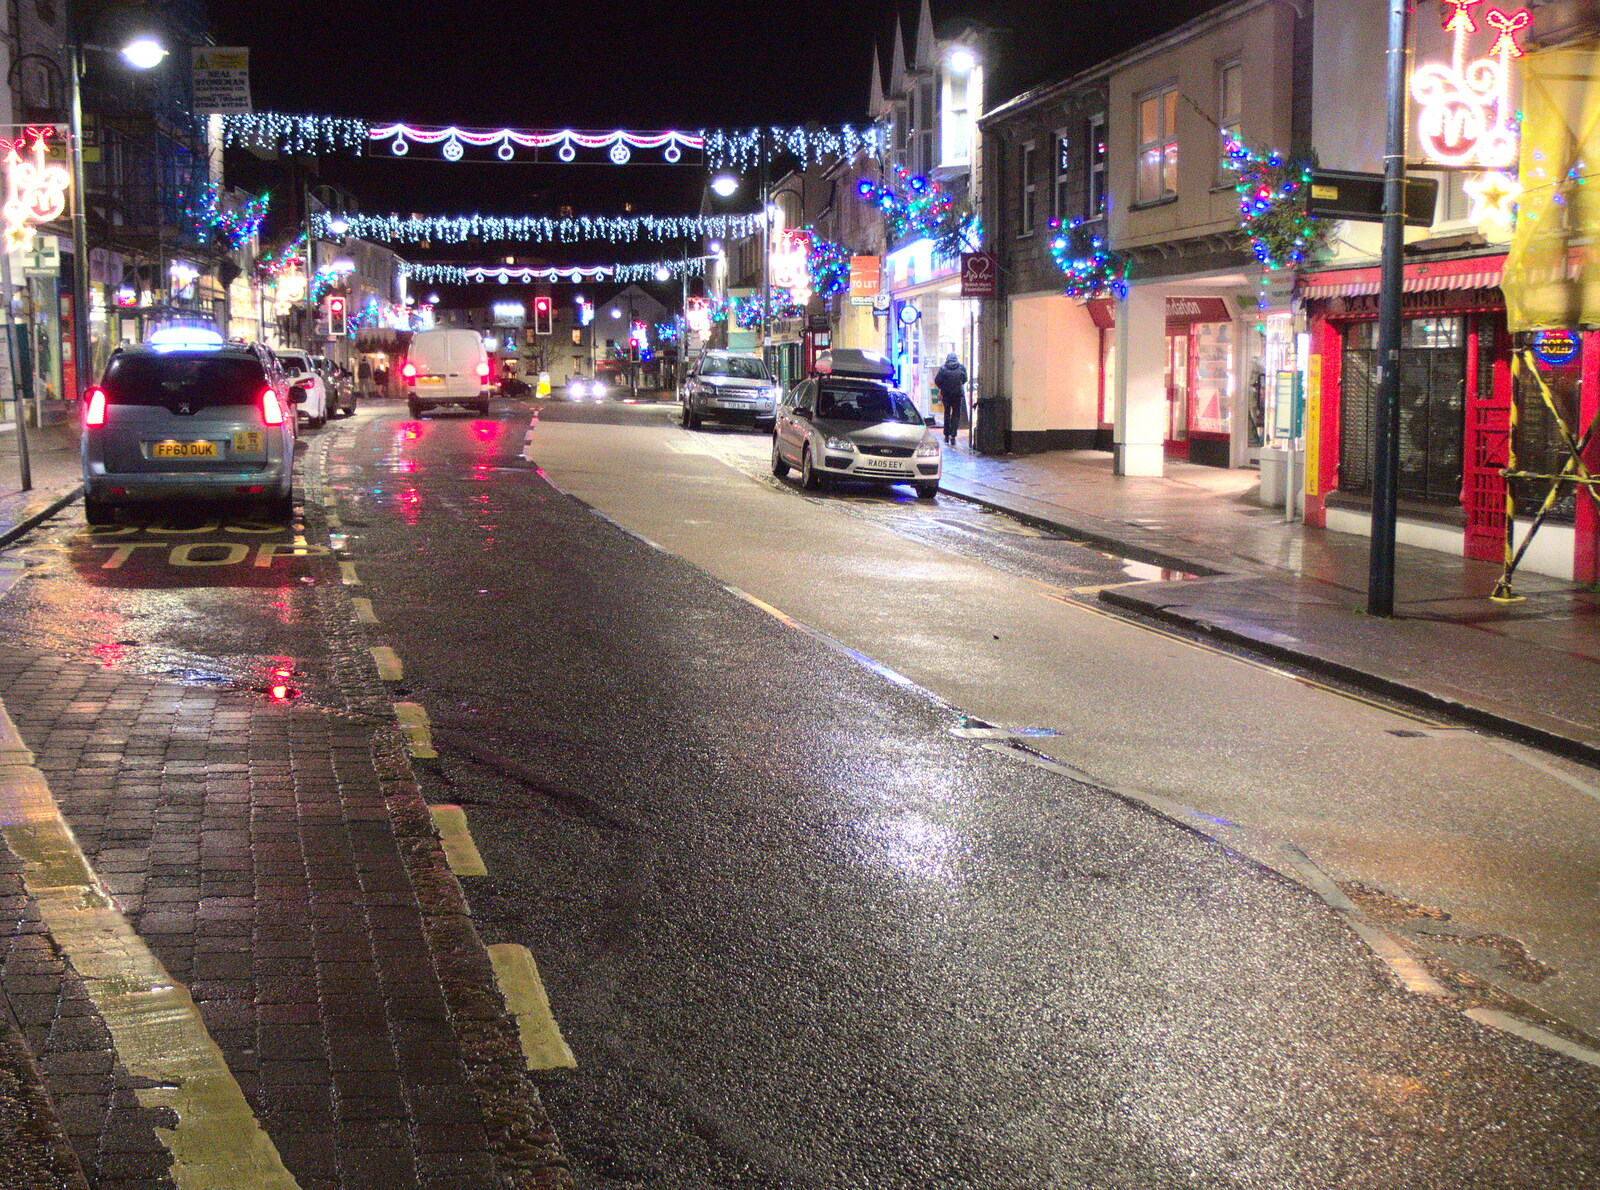 Fore Street again from New Year's Eve in Spreyton, Devon - 31st December 2017